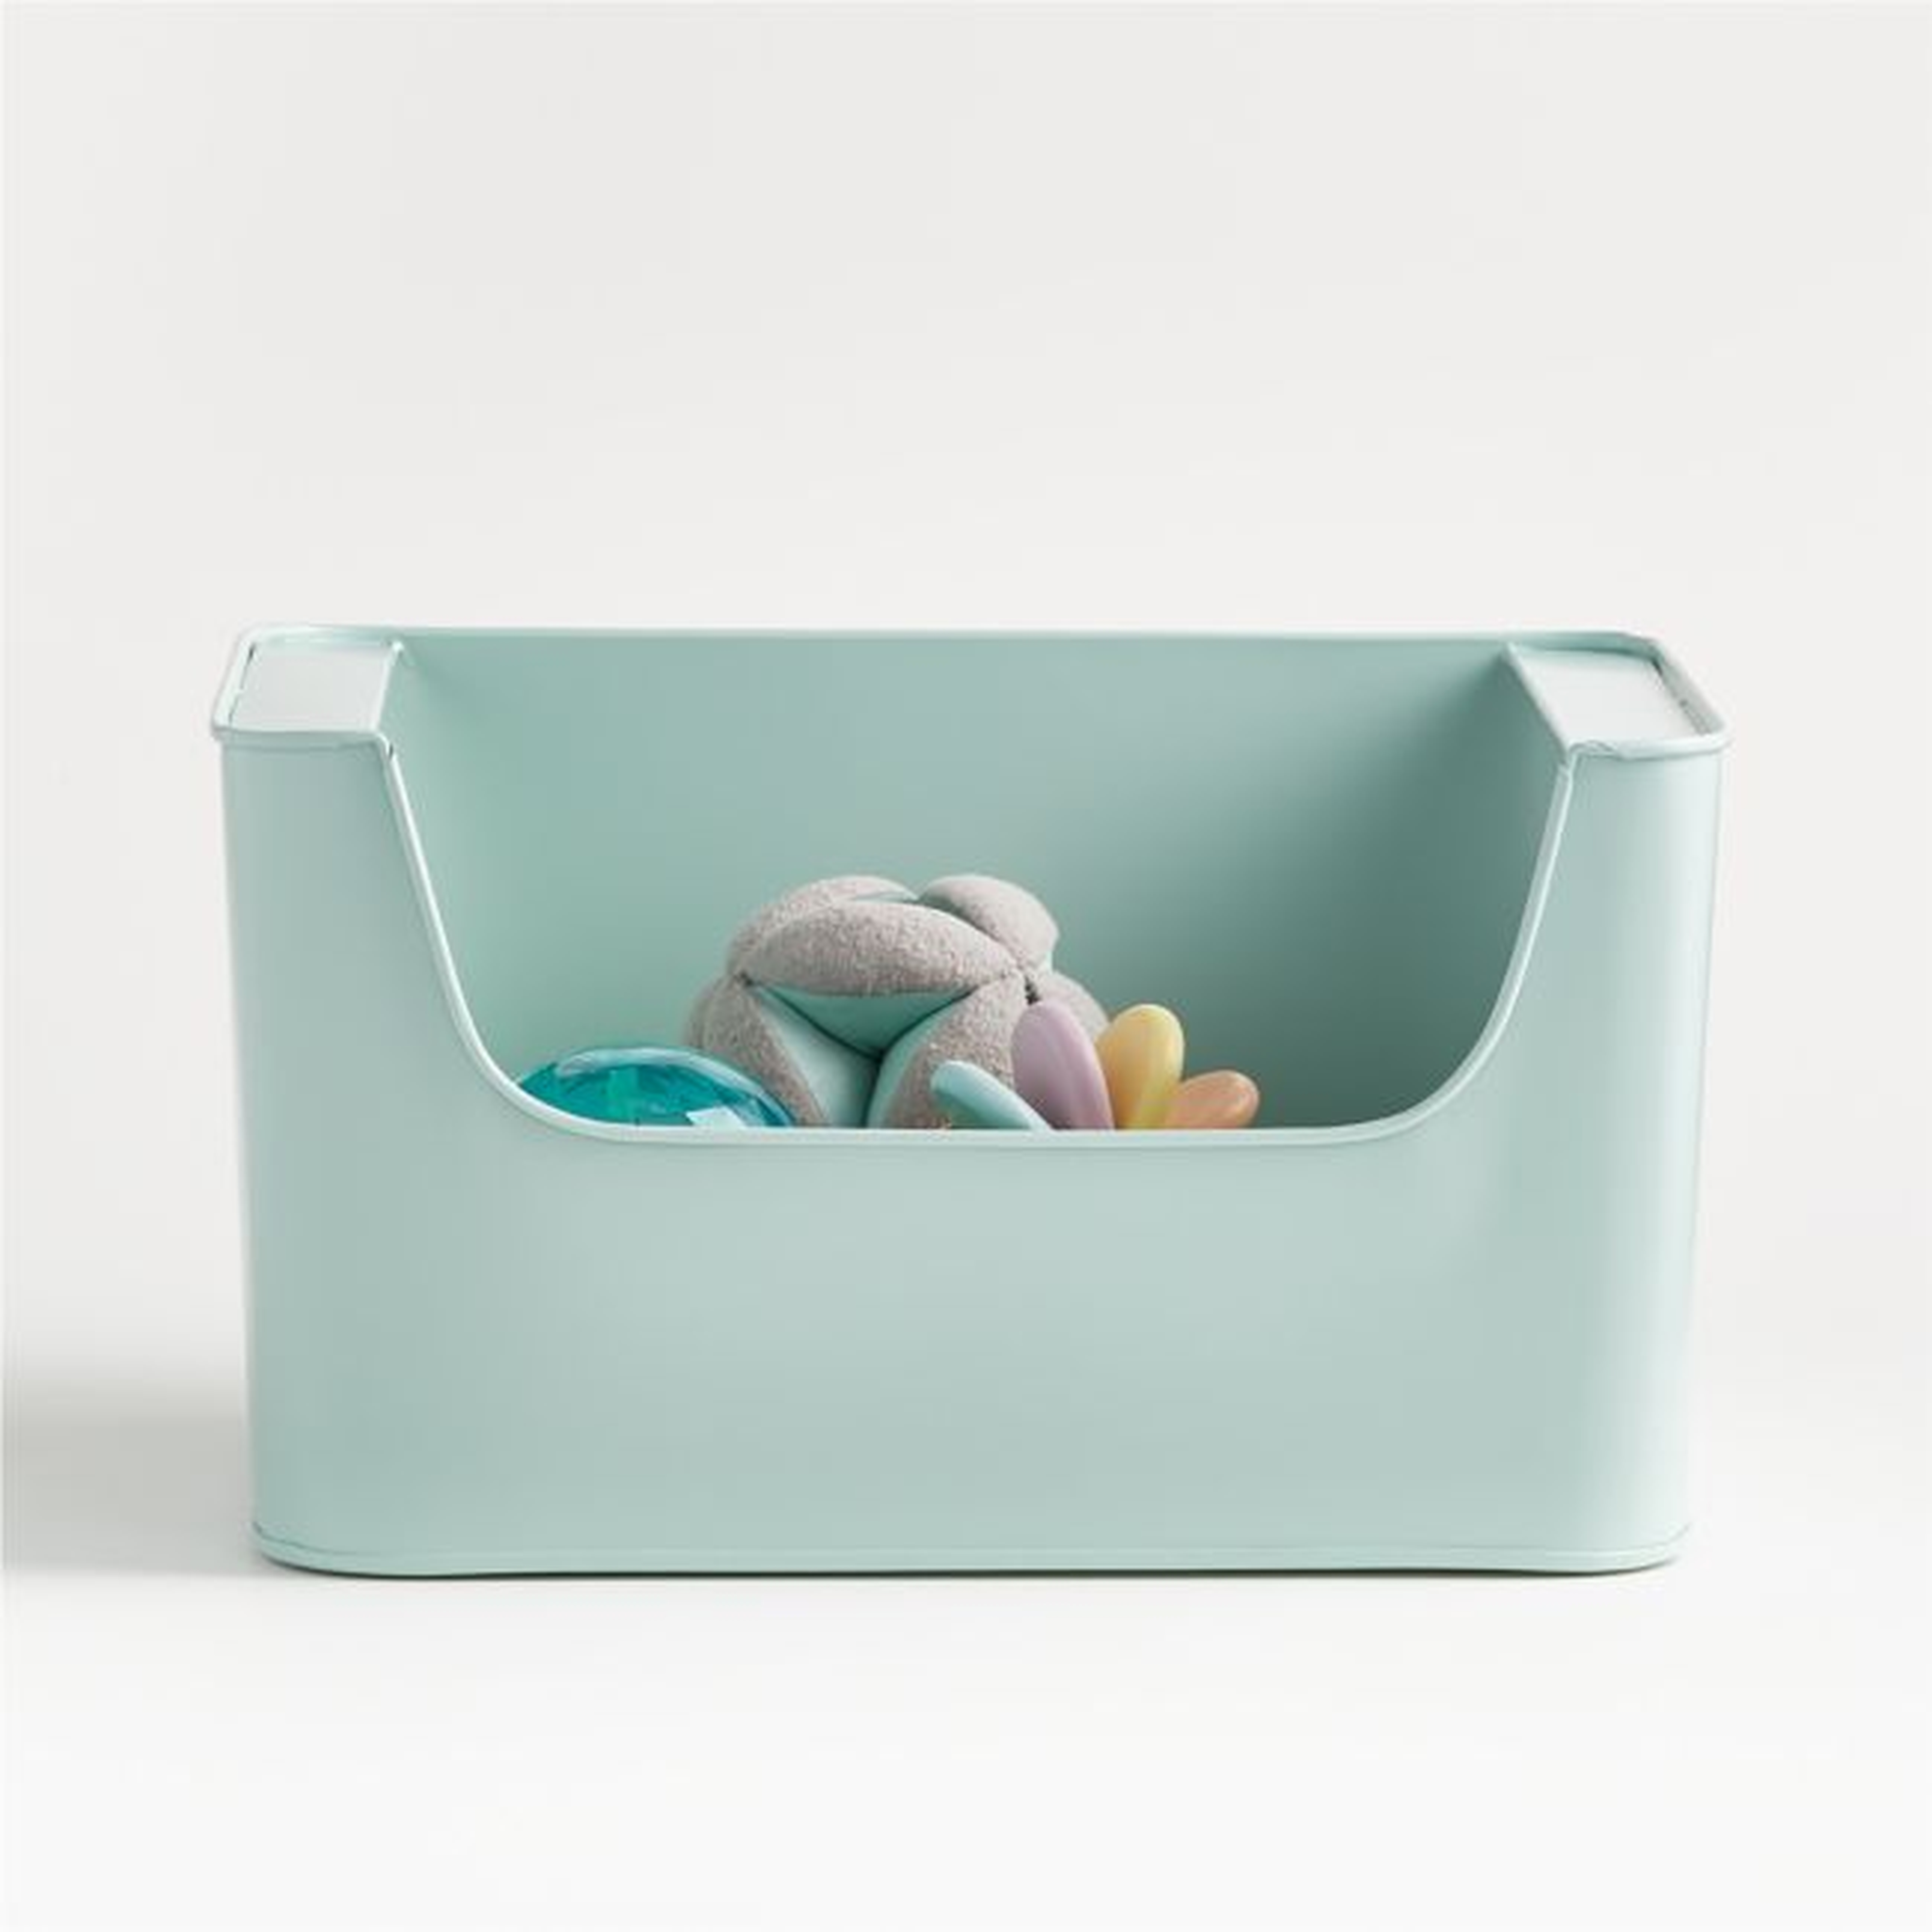 Small Mint Green Metal Stacking Storage Bin with Handles - Crate and Barrel